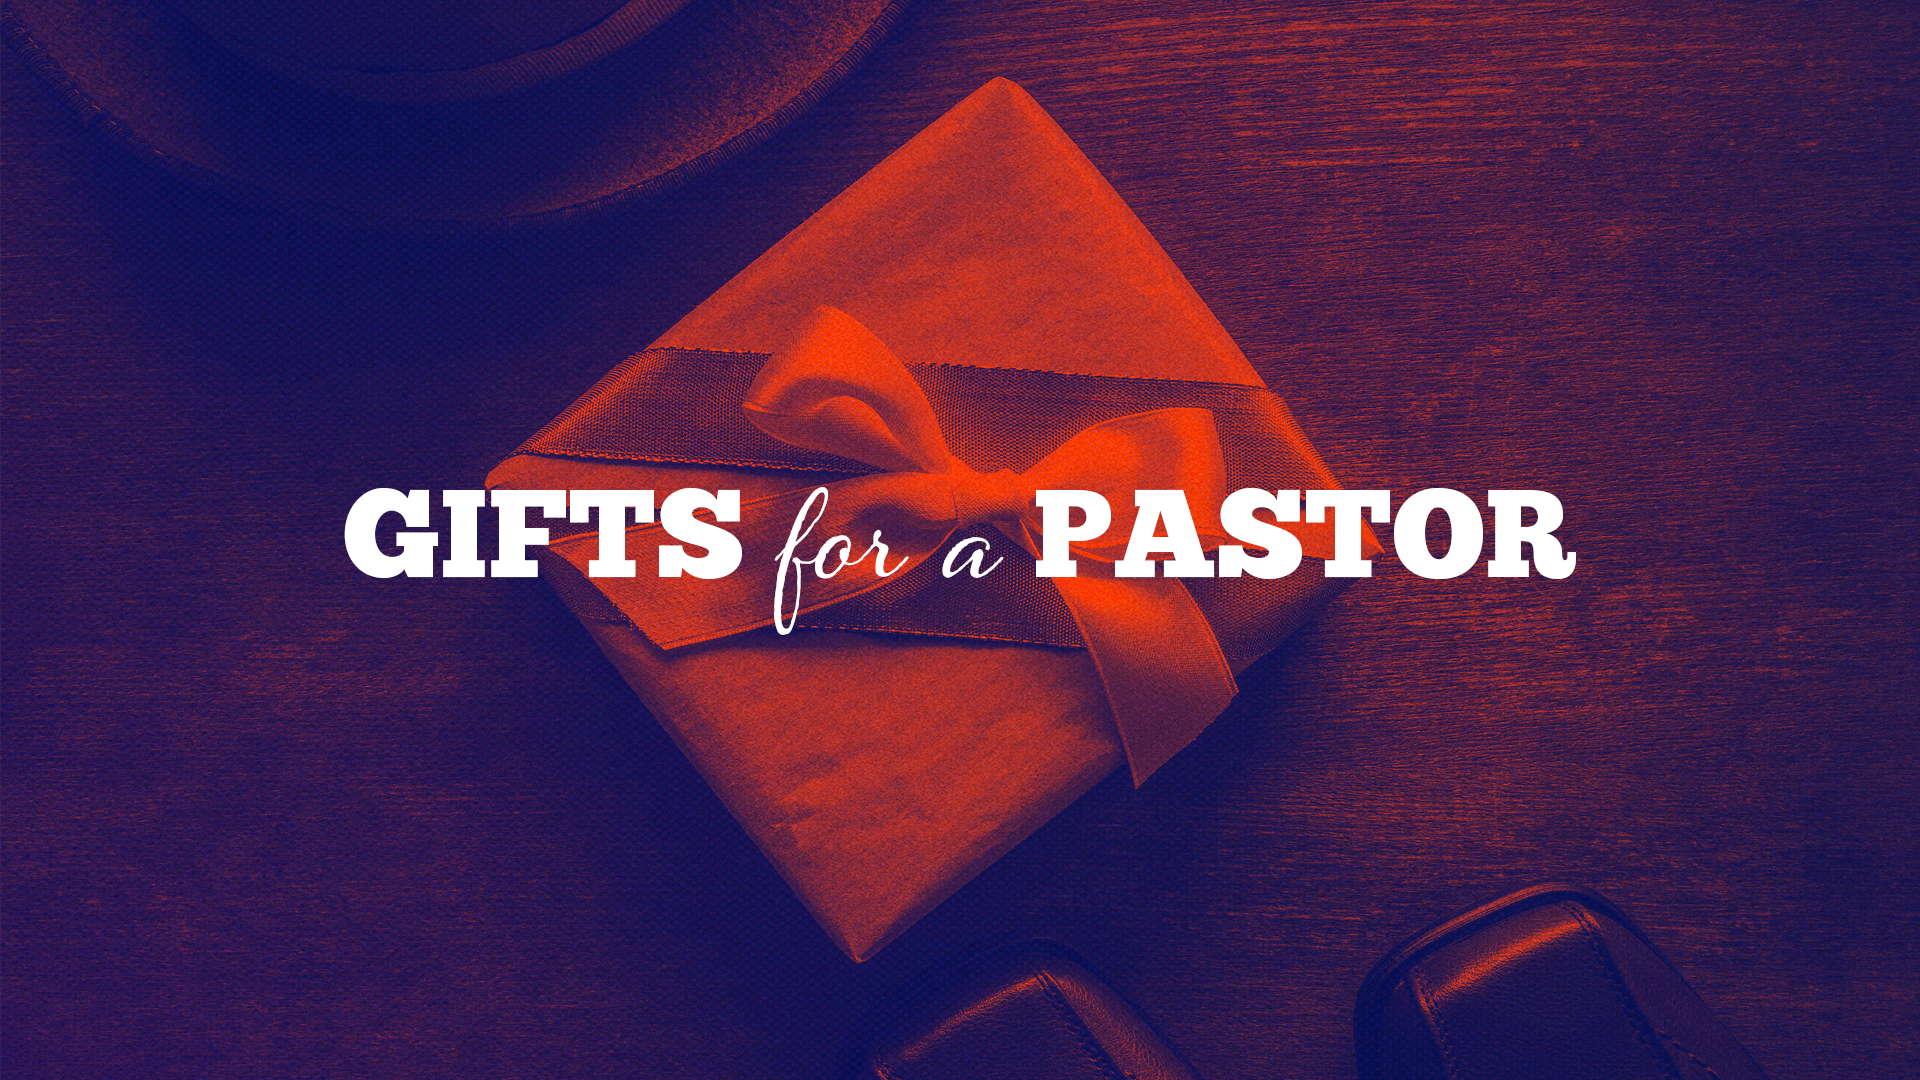 Gifts for a Pastor